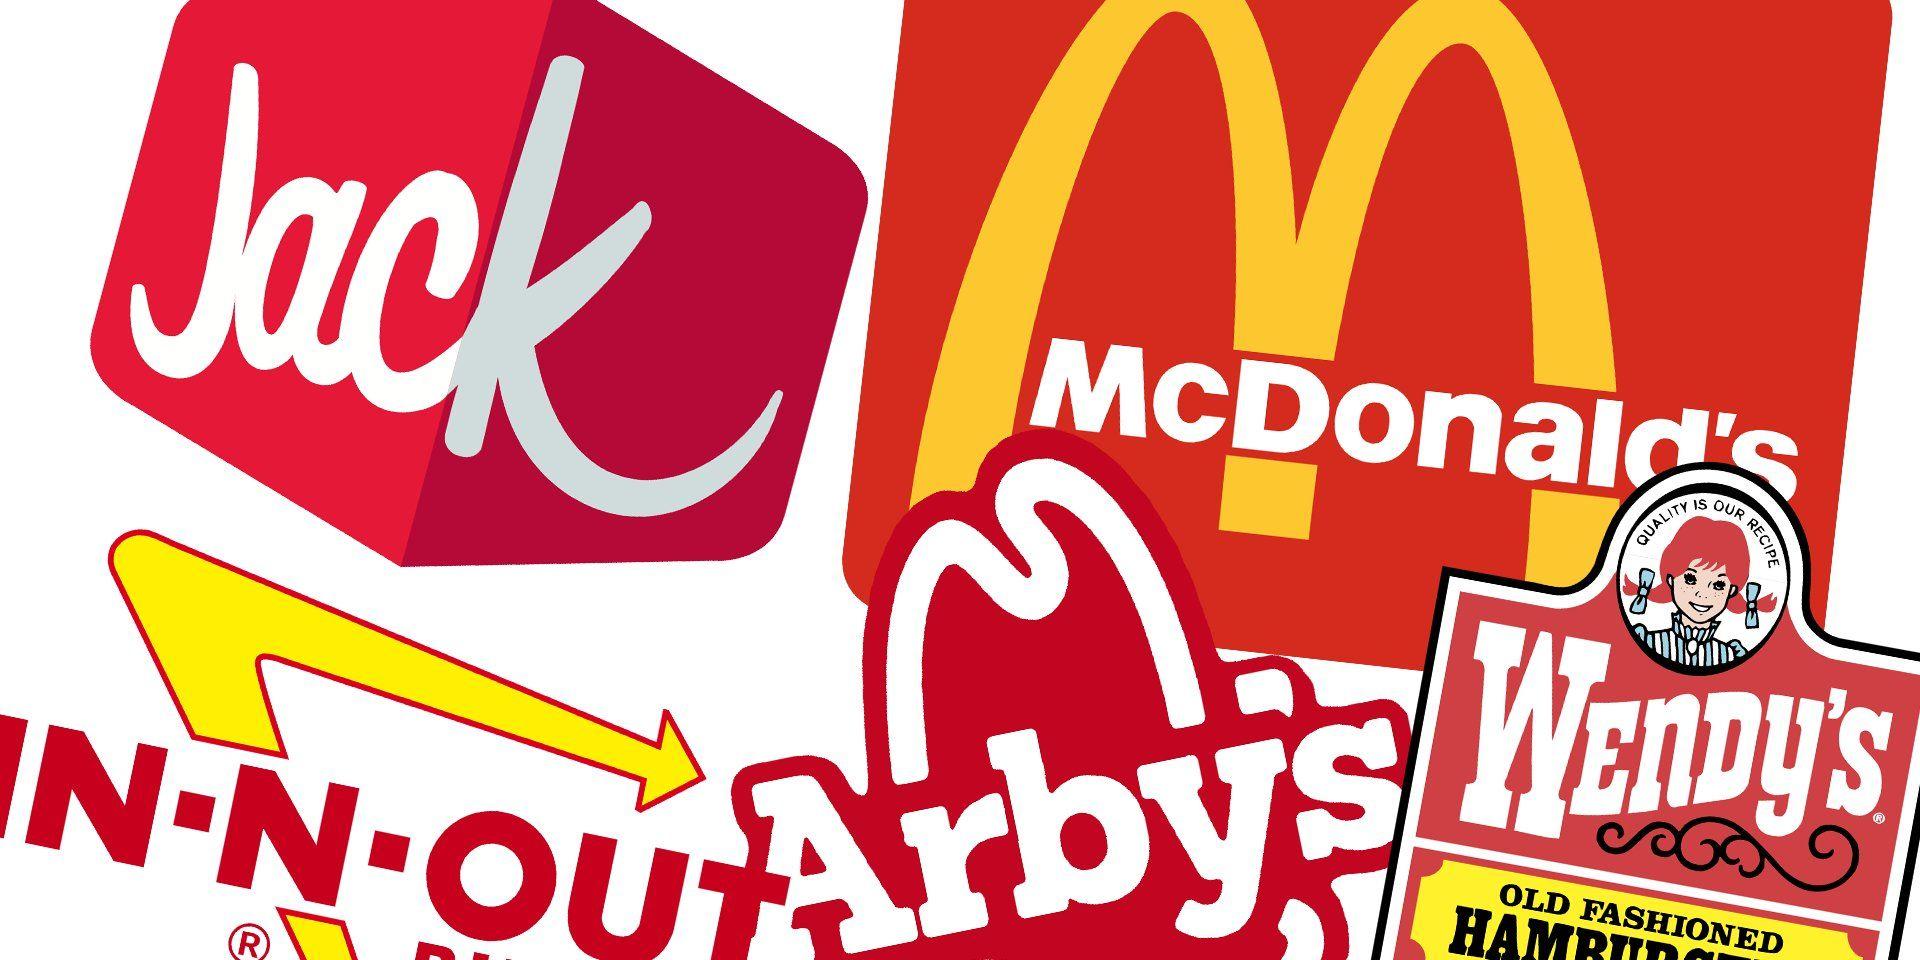 Red Food Brand Logo - Almost every major fast food chain uses red in their logo, why ...